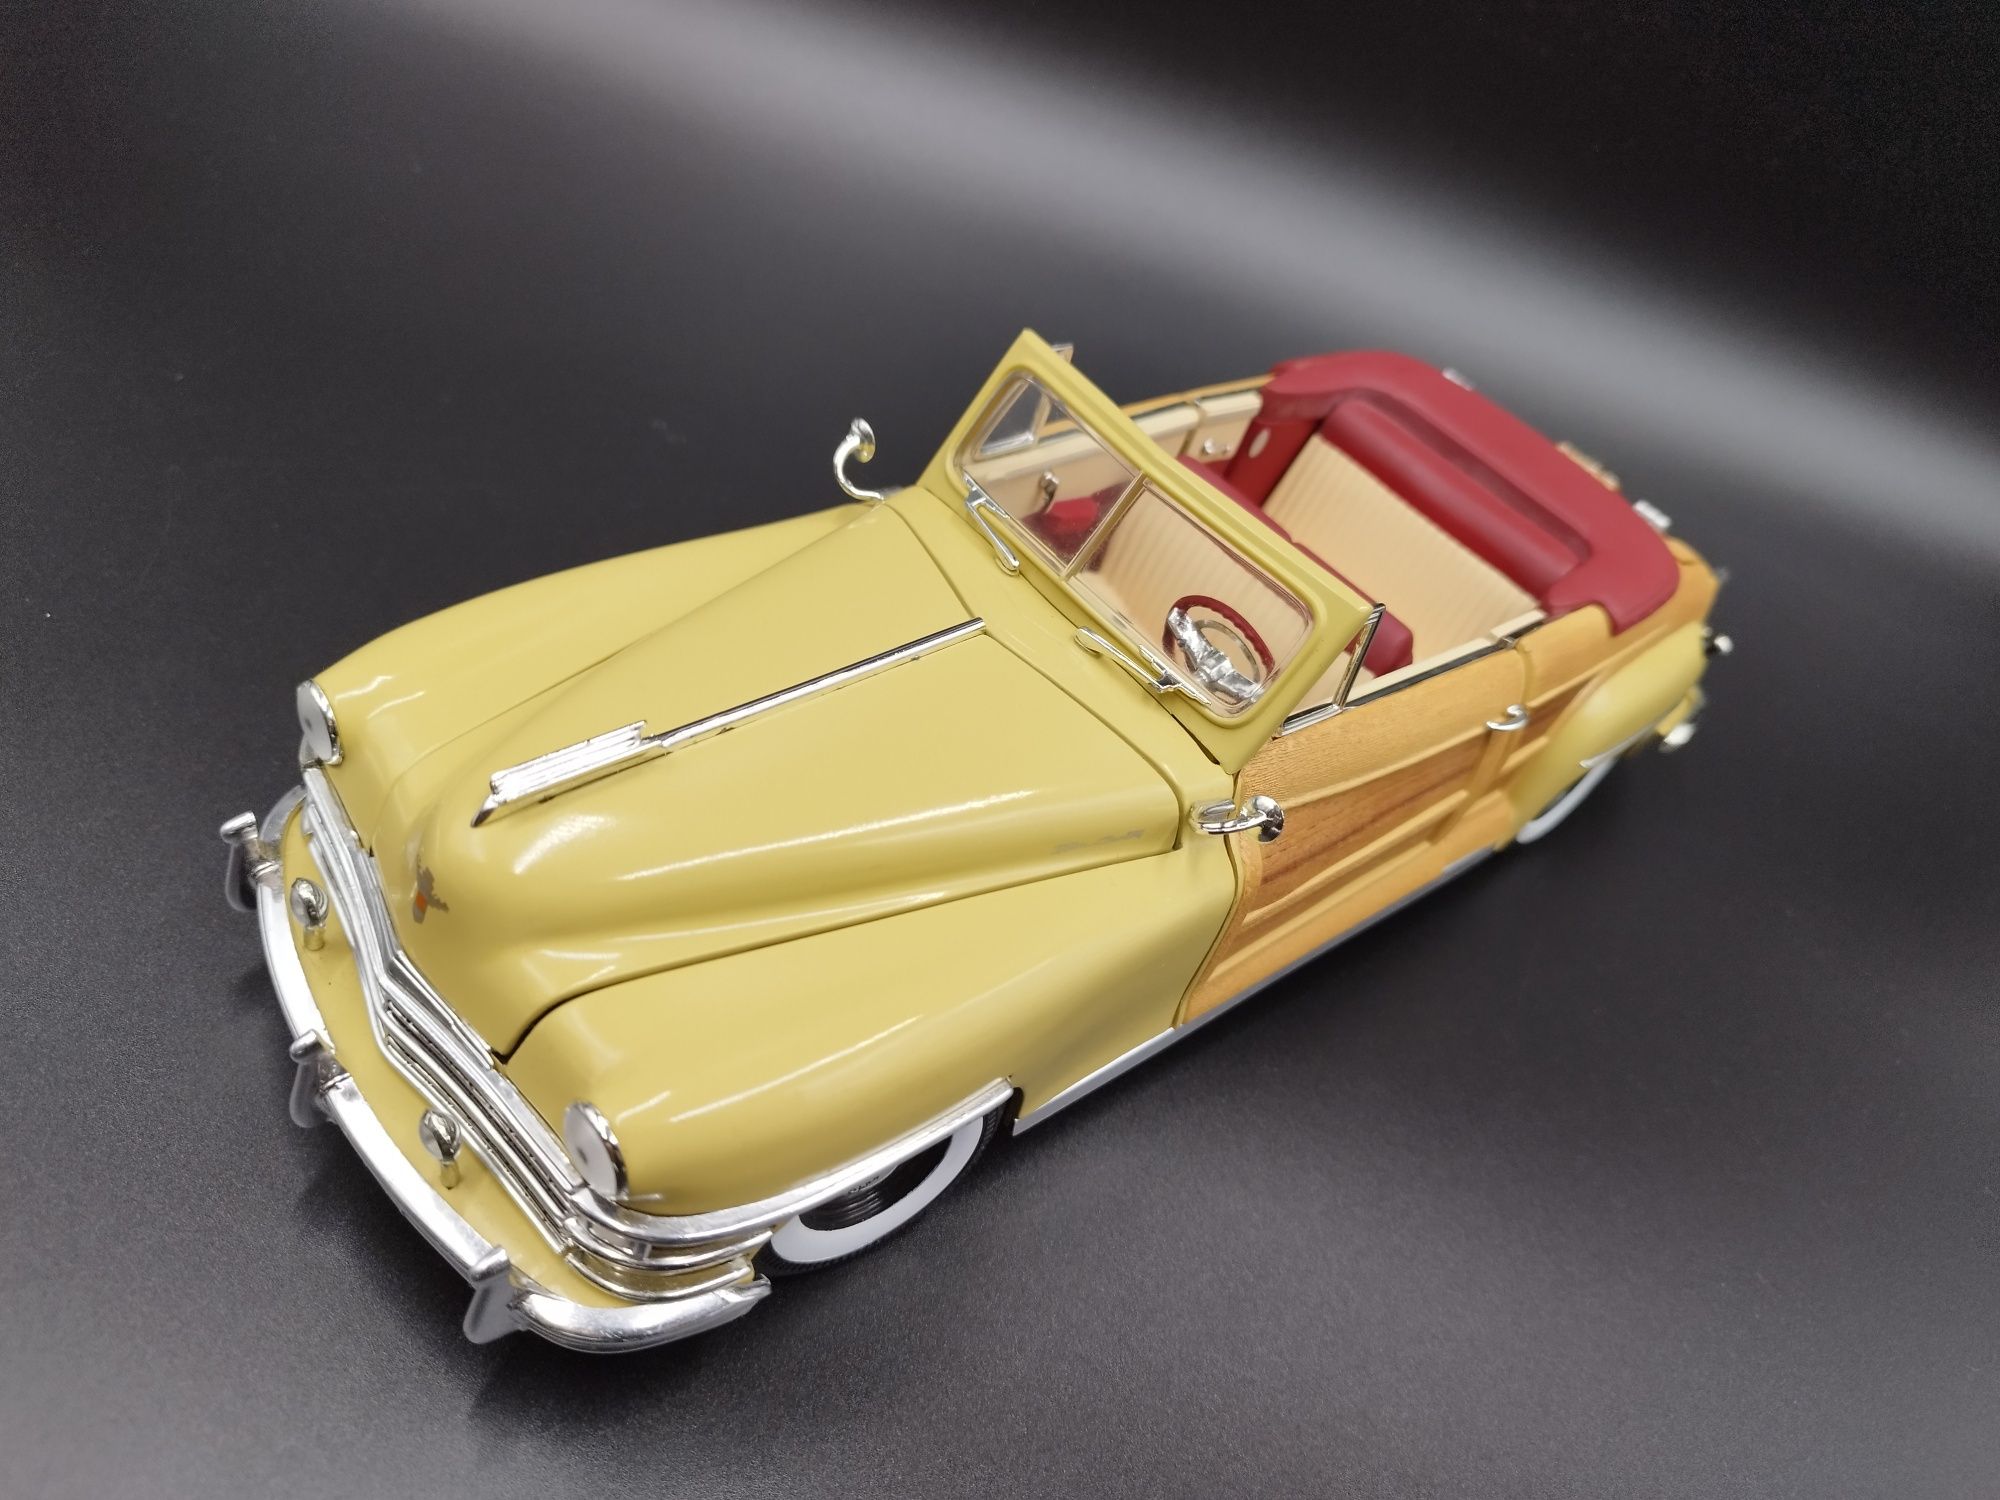 1:18 Motor City Classics 1948 Chrysler Town Country Convertible model